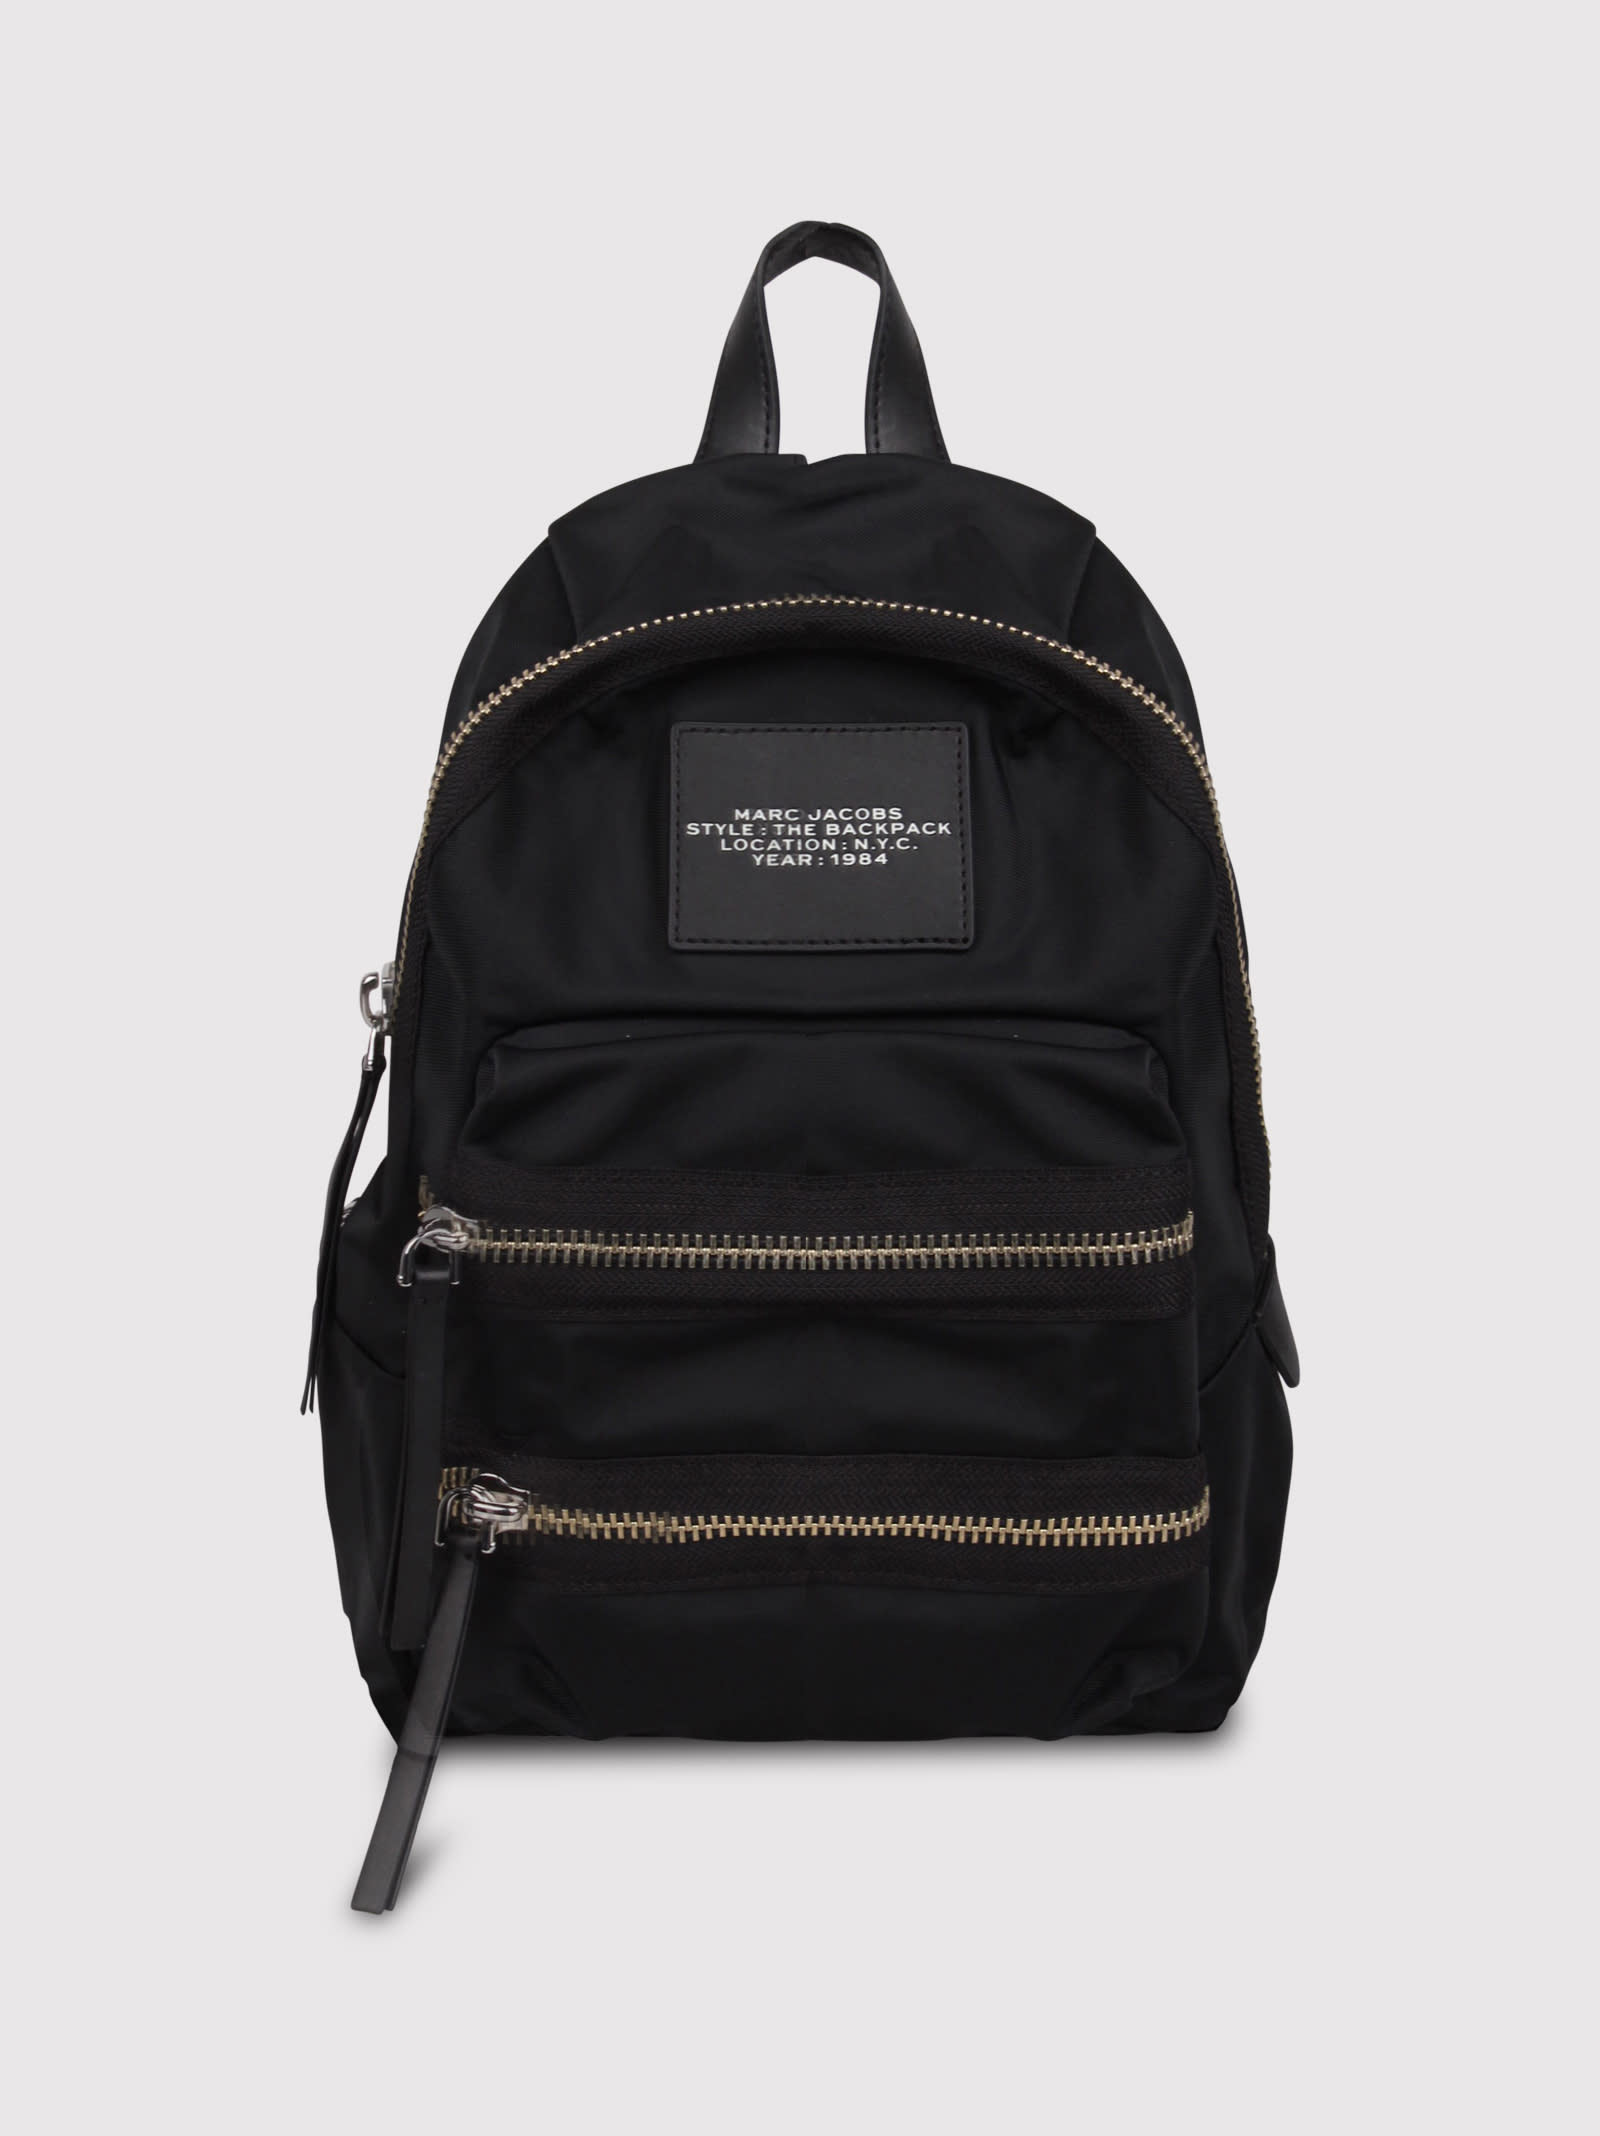 MARC JACOBS MARC JACOBS NYLON BACKPACK